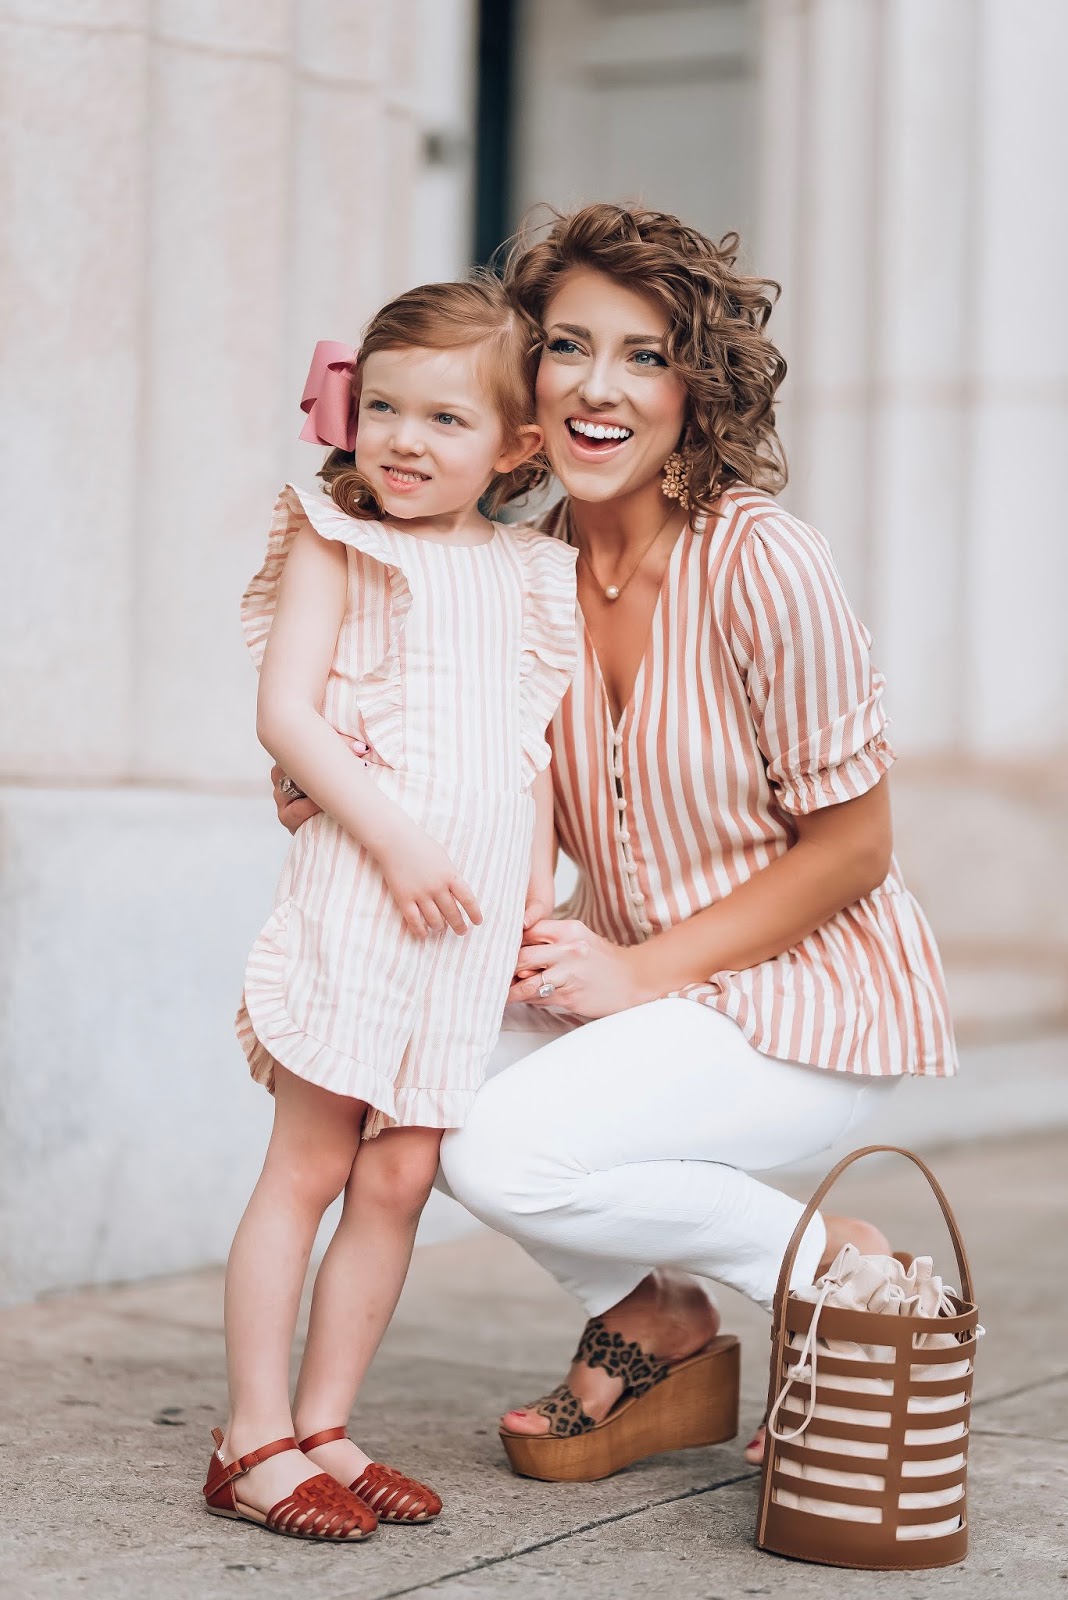 Mommy and Me Stripes for Spring: Madewell Stripe Peplum Top + Target Style Bow Back Romper for toddler girls - Something Delightful Blog #springstyle #springfashion #springlooks